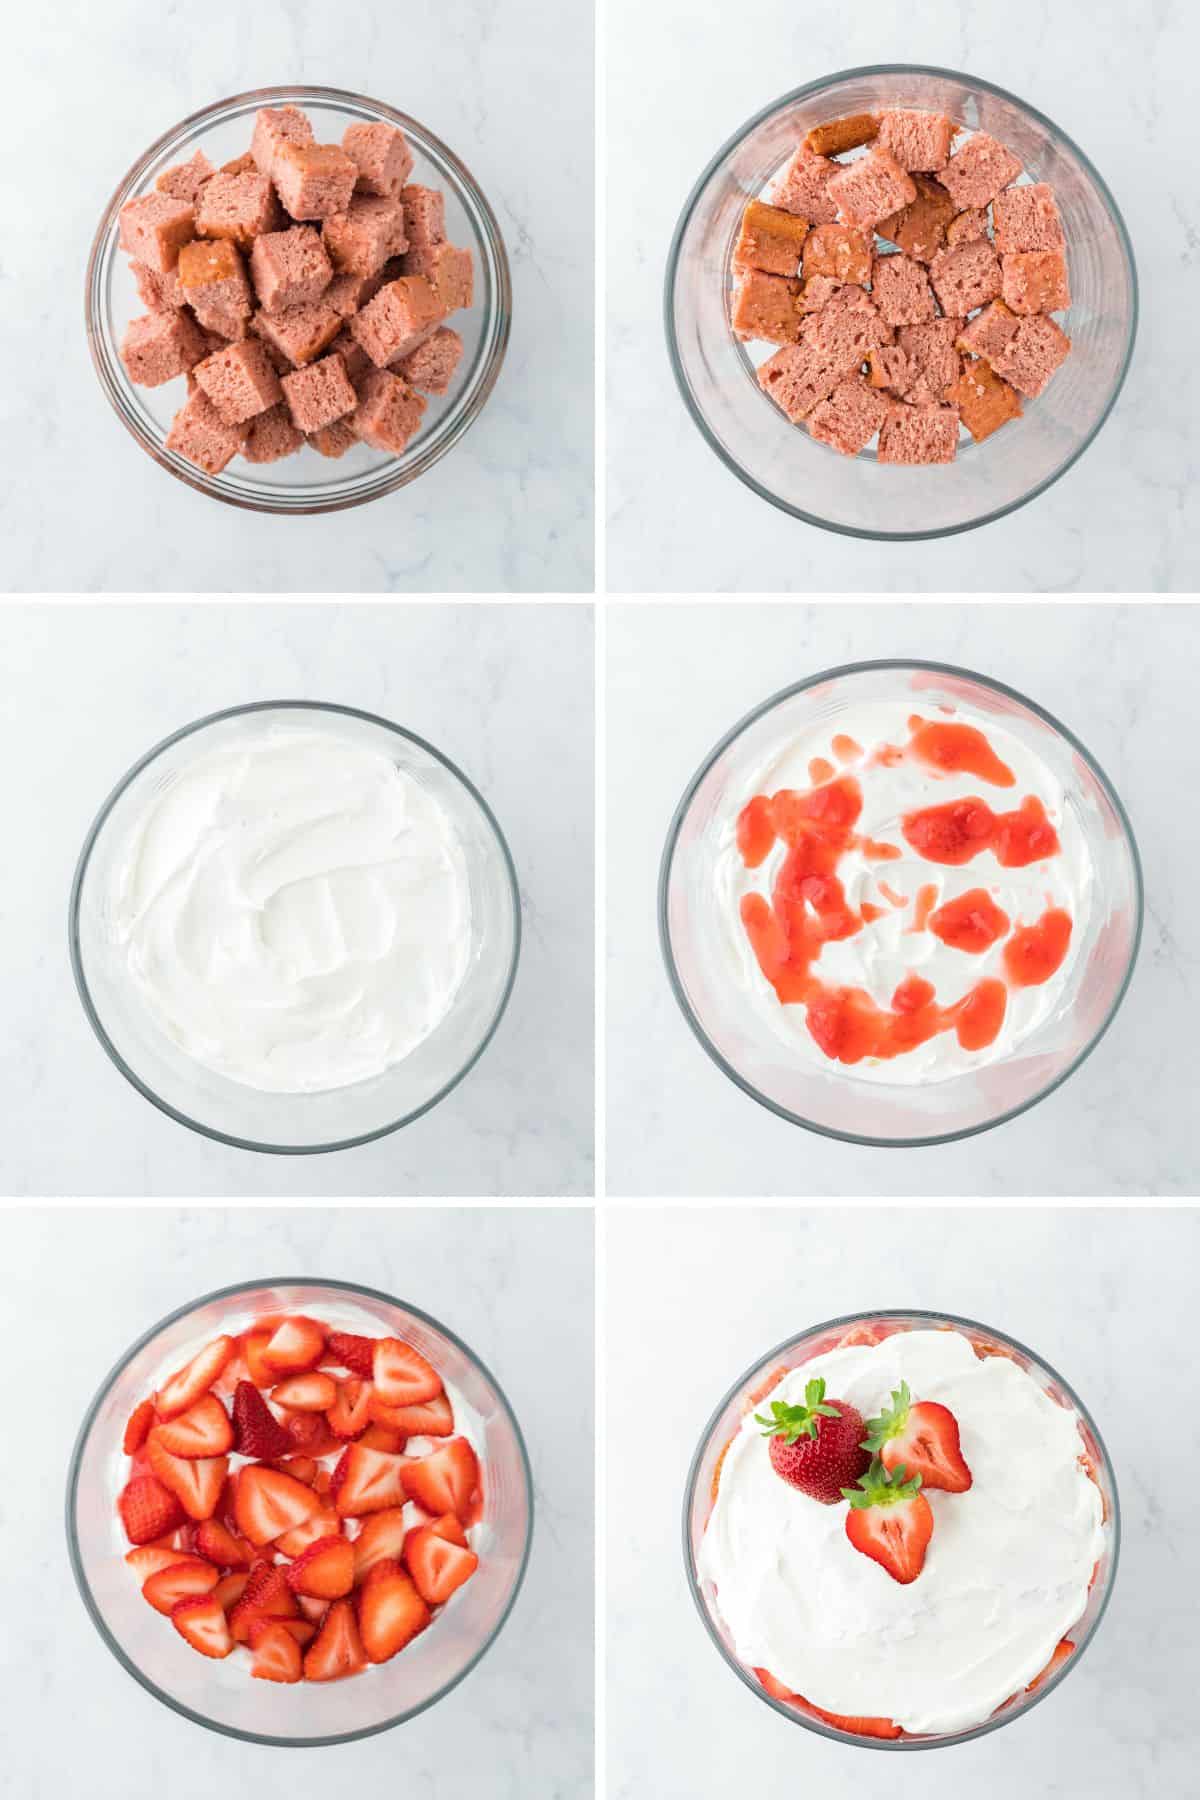 A collage showing the cut cake, layered in the dish, topped with whipped cream, then strawberry sauce, fresh berries, and last whipped cream and strawberries for garnish.